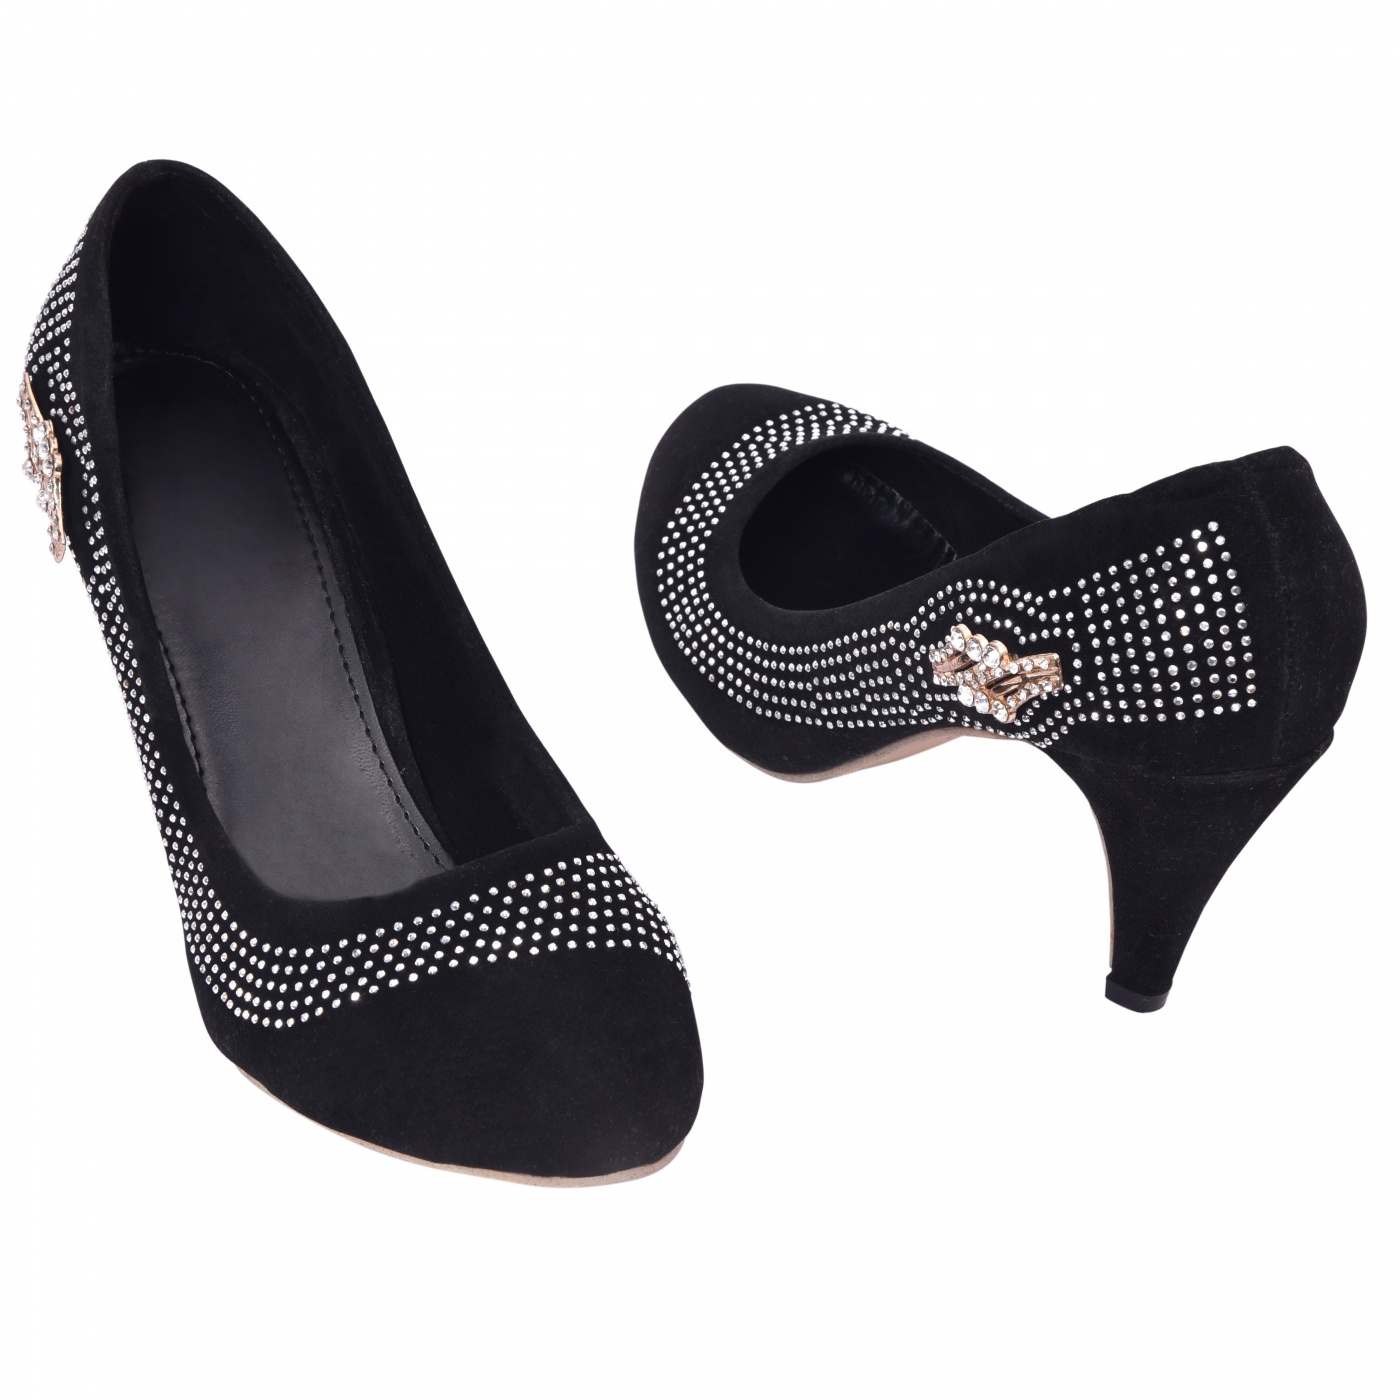 black belly shoes with heels